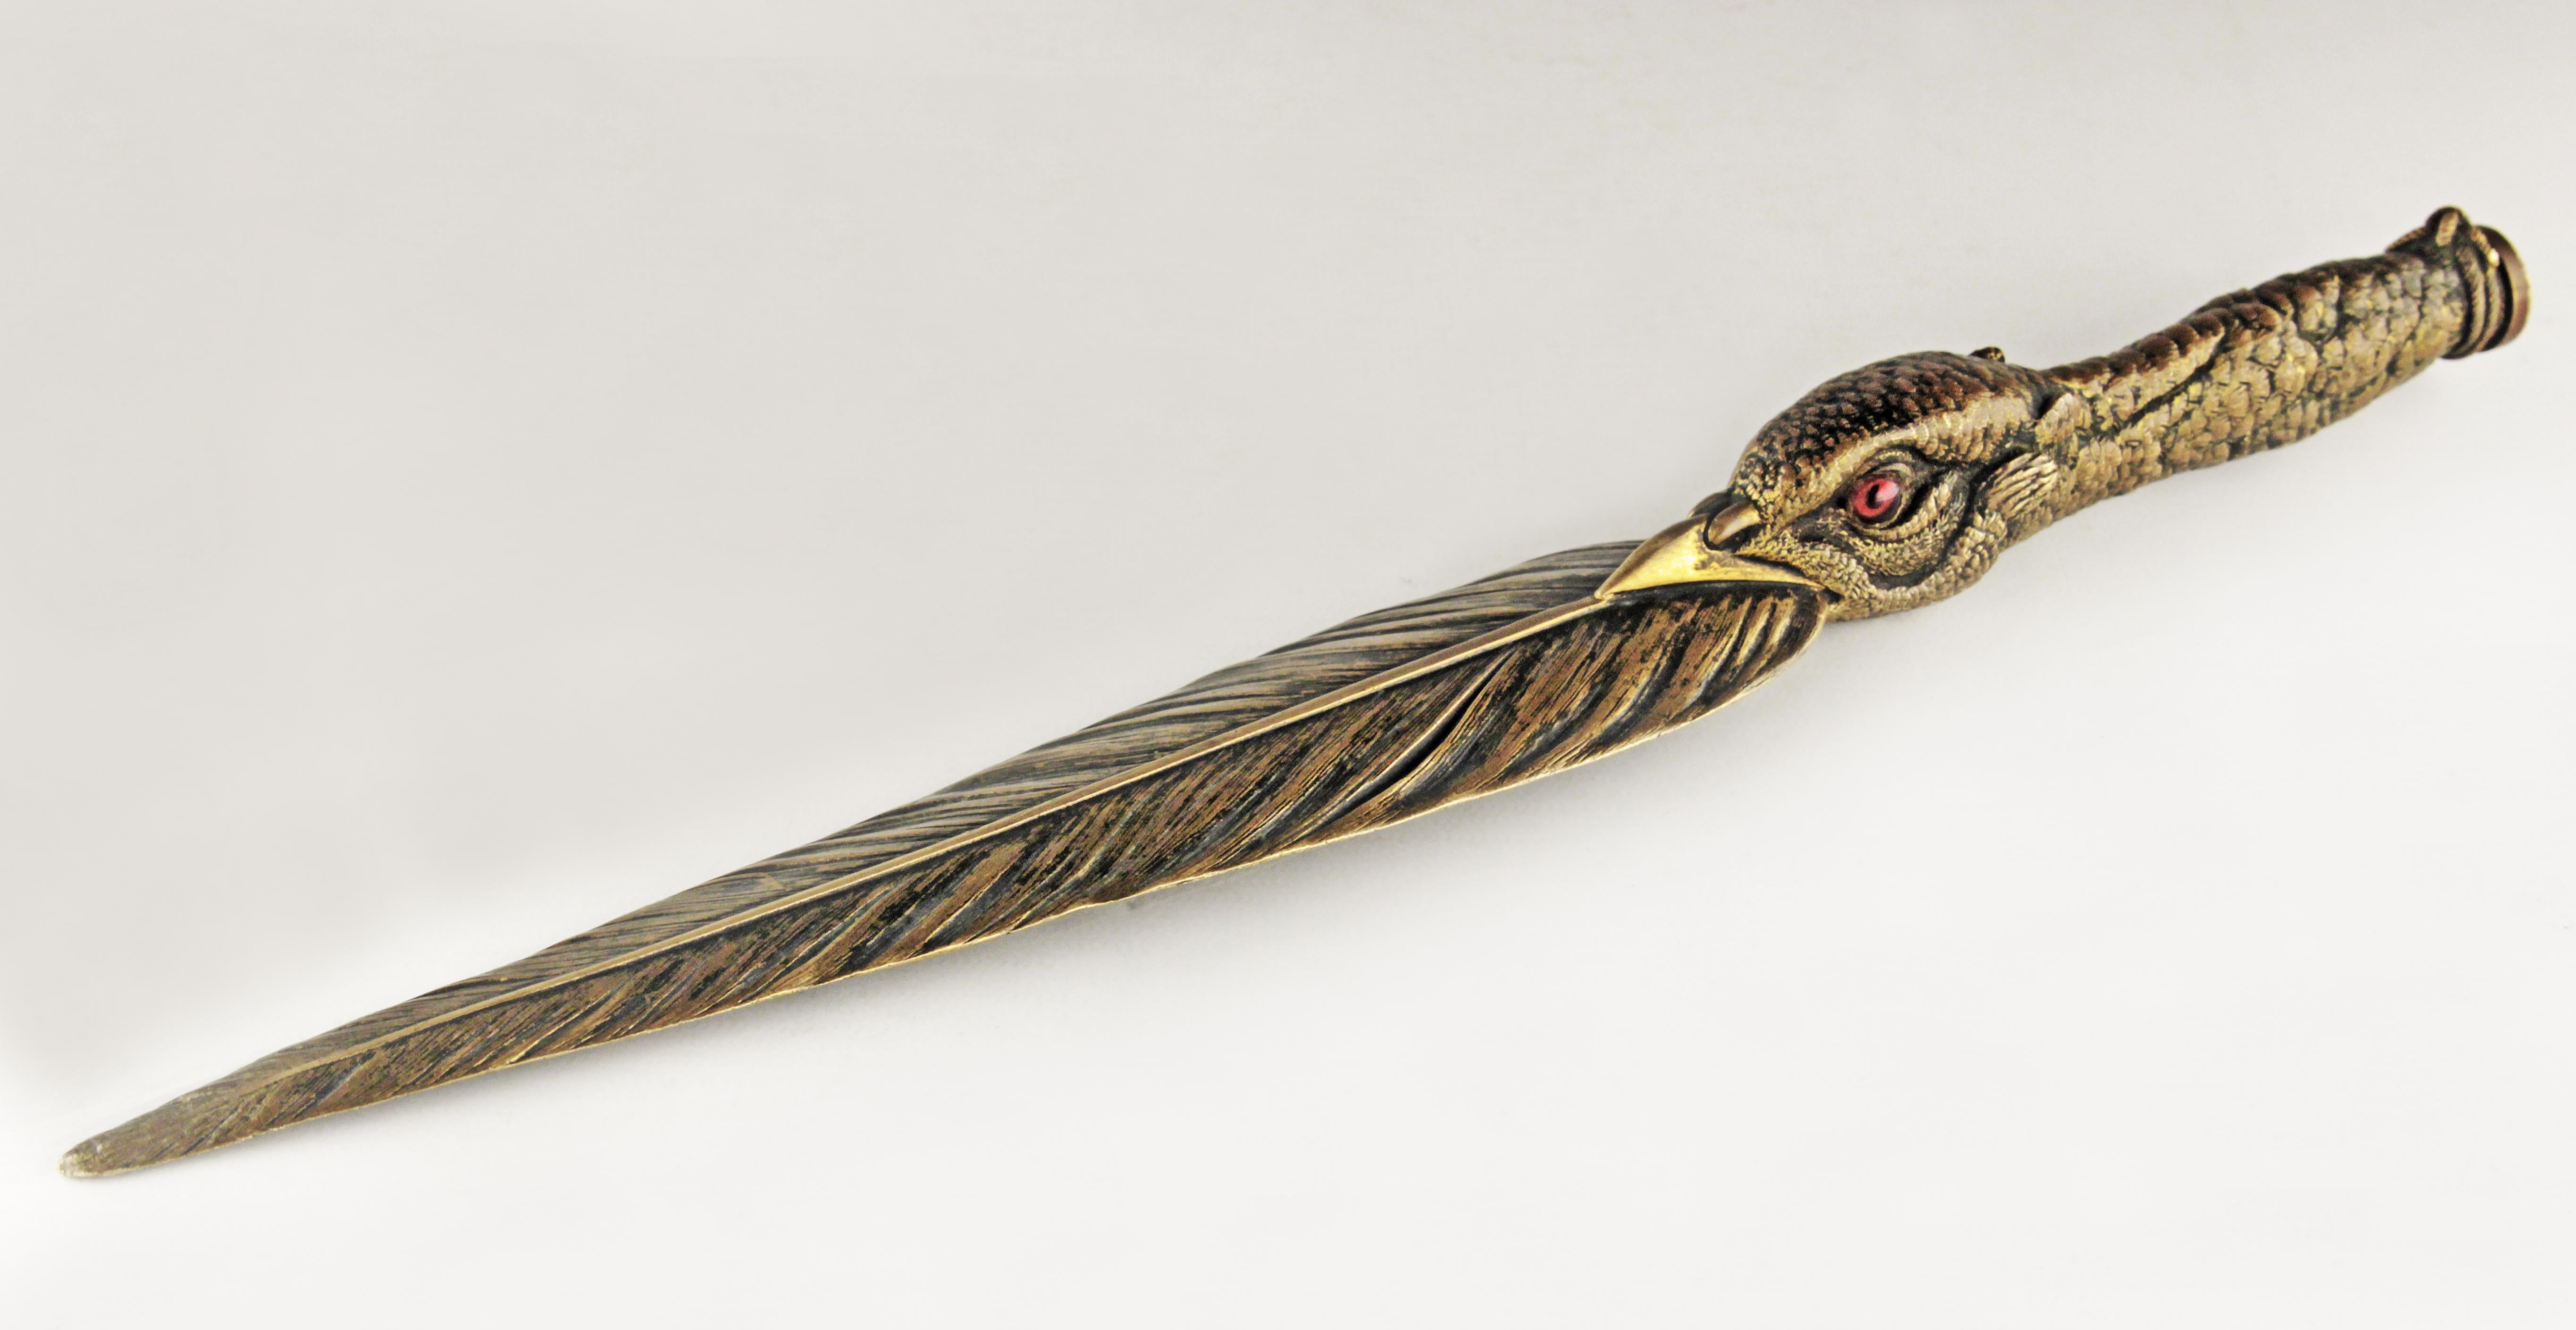 Late 19th century bronze letter opener knife depicting an eagle made by french animalier sculptor Jules Moigniez

By: Jules Moigniez
Material: bronze, copper, metal
Technique: lost wax casting, repoussé, metalwork
Dimensions: 1.5 in x 2 in x 14